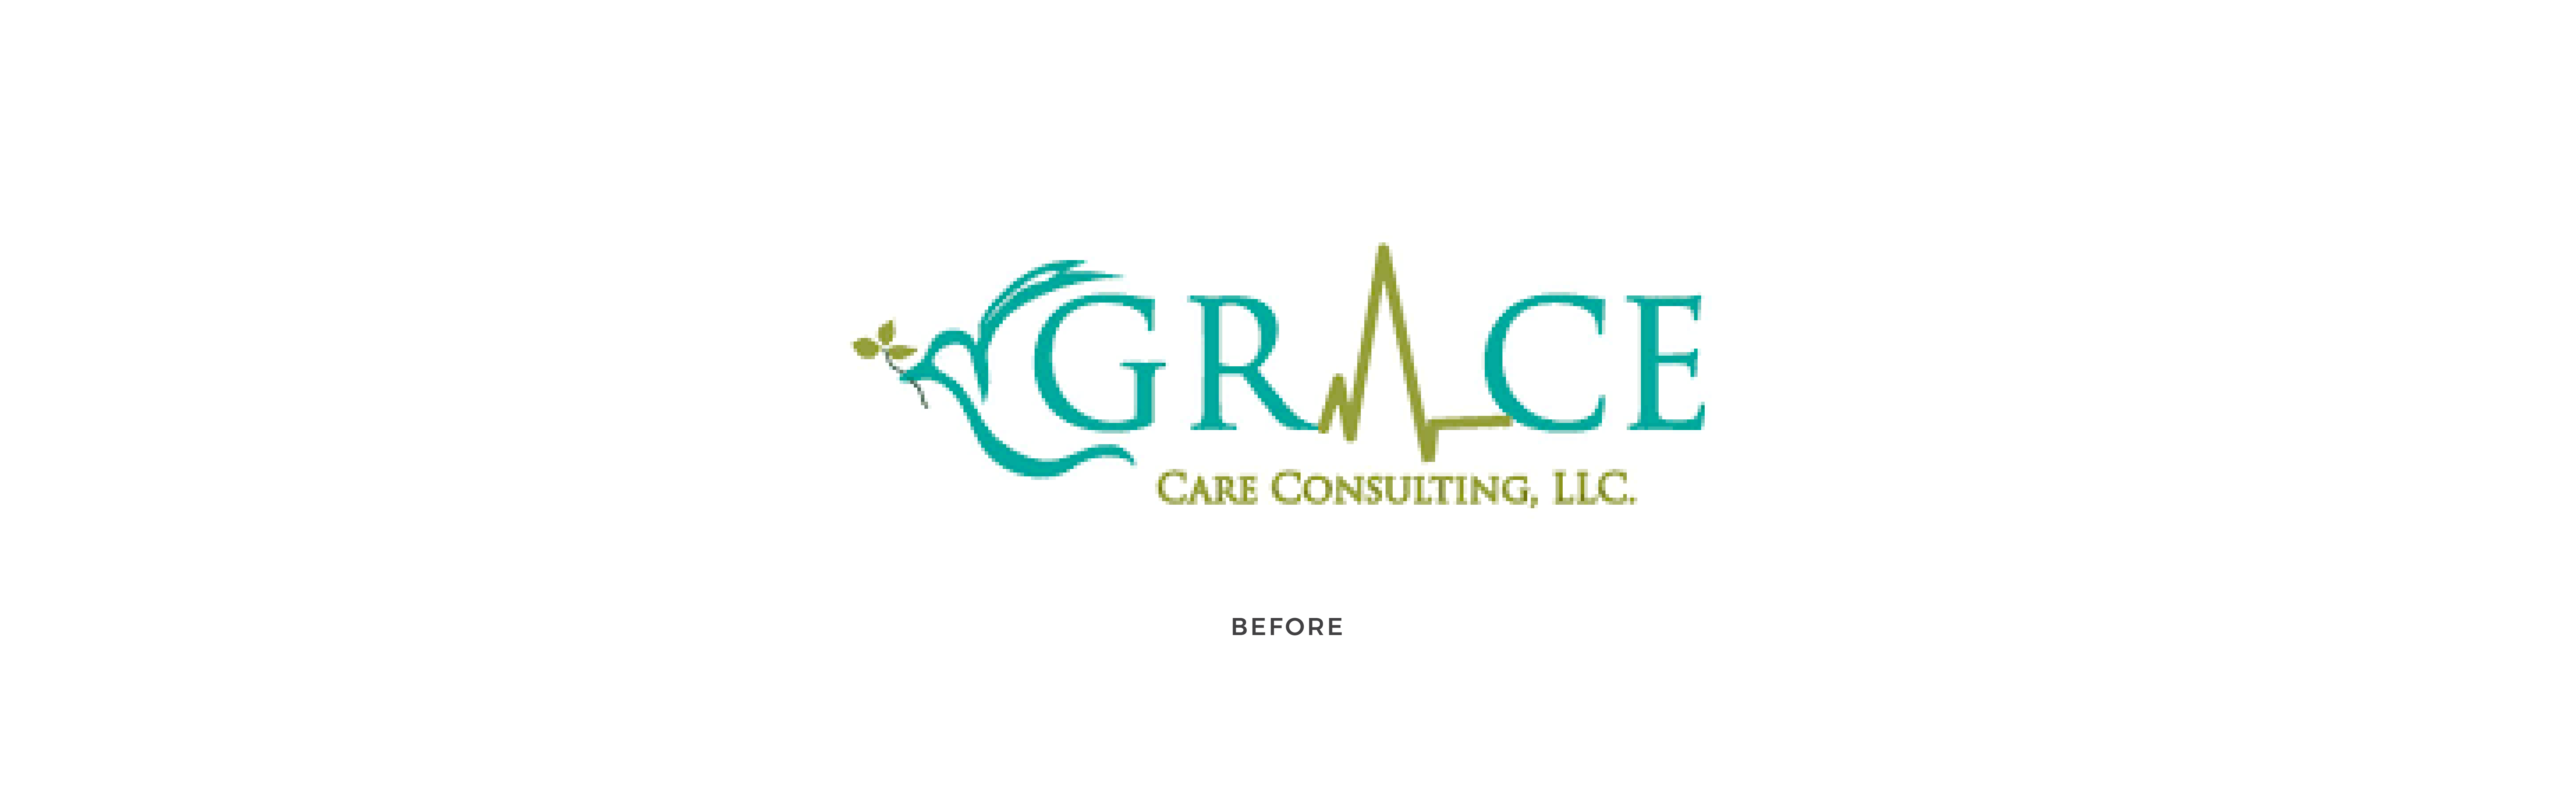 Grace Care Consulting logo design before